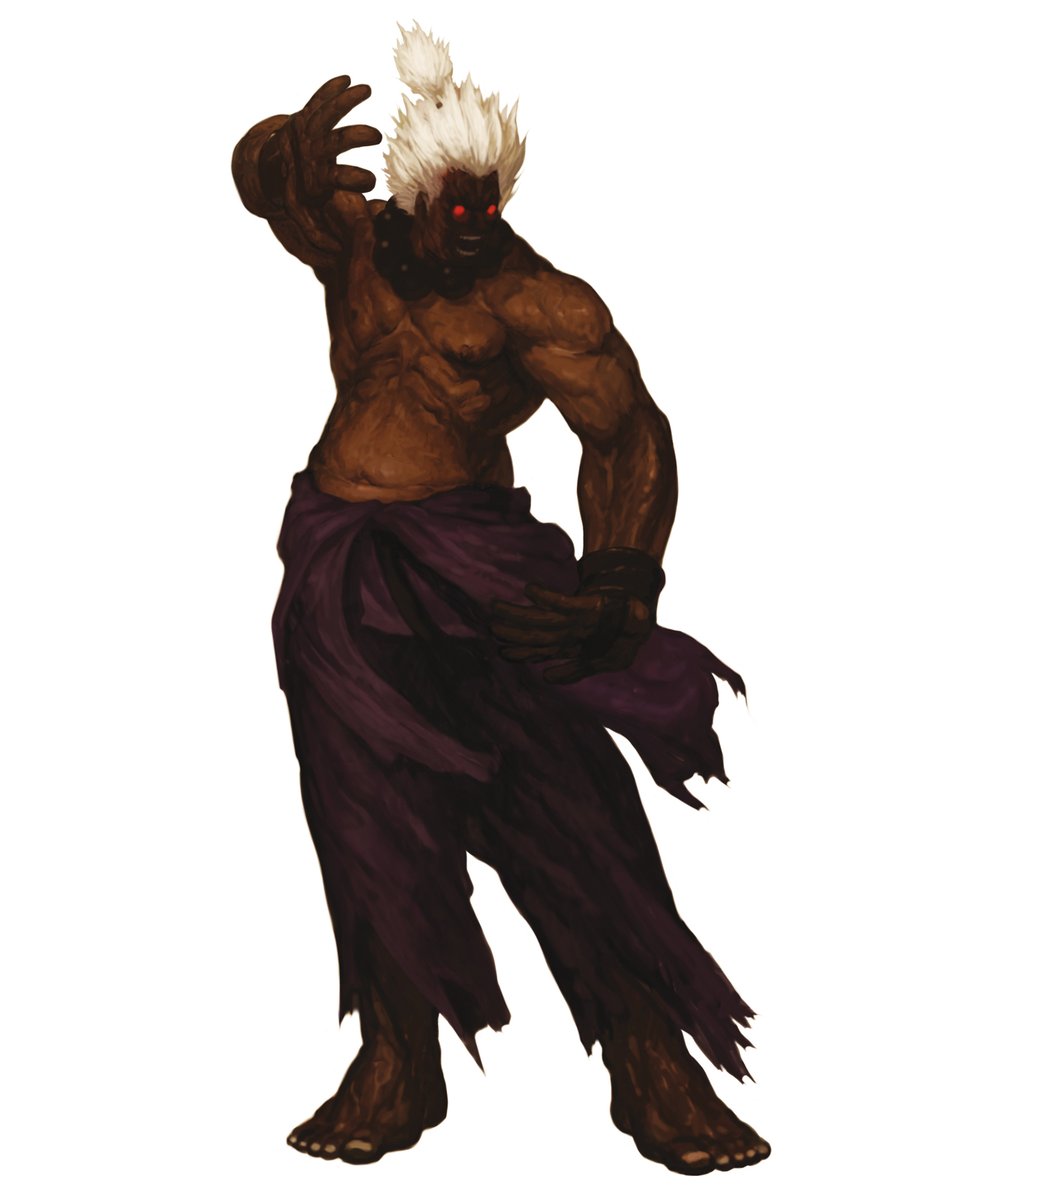 svc chaos art actually put shin akuma and mr karate directly in the same pose of those statues (but with looser belly)